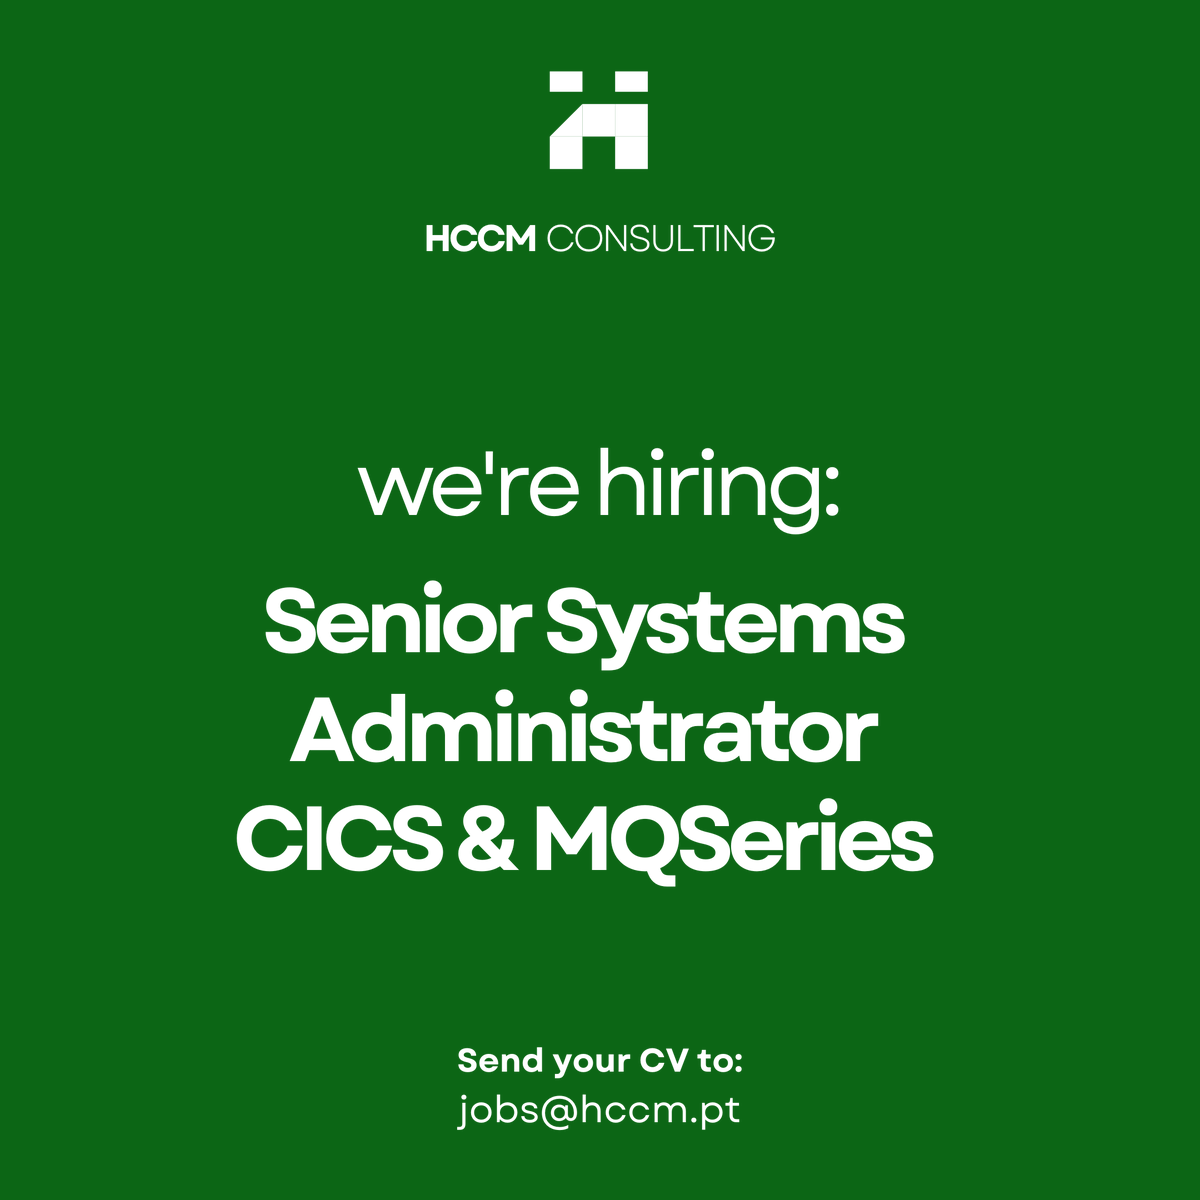 📷Are you looking for a new challenge in your career and don't know where to start? We are looking for a Senior Systems Administrator CICS & MQSeries! Do you want to know more? Send your CV to jobs@hccm.pt.
#hccm #hiring #systemsadministrator